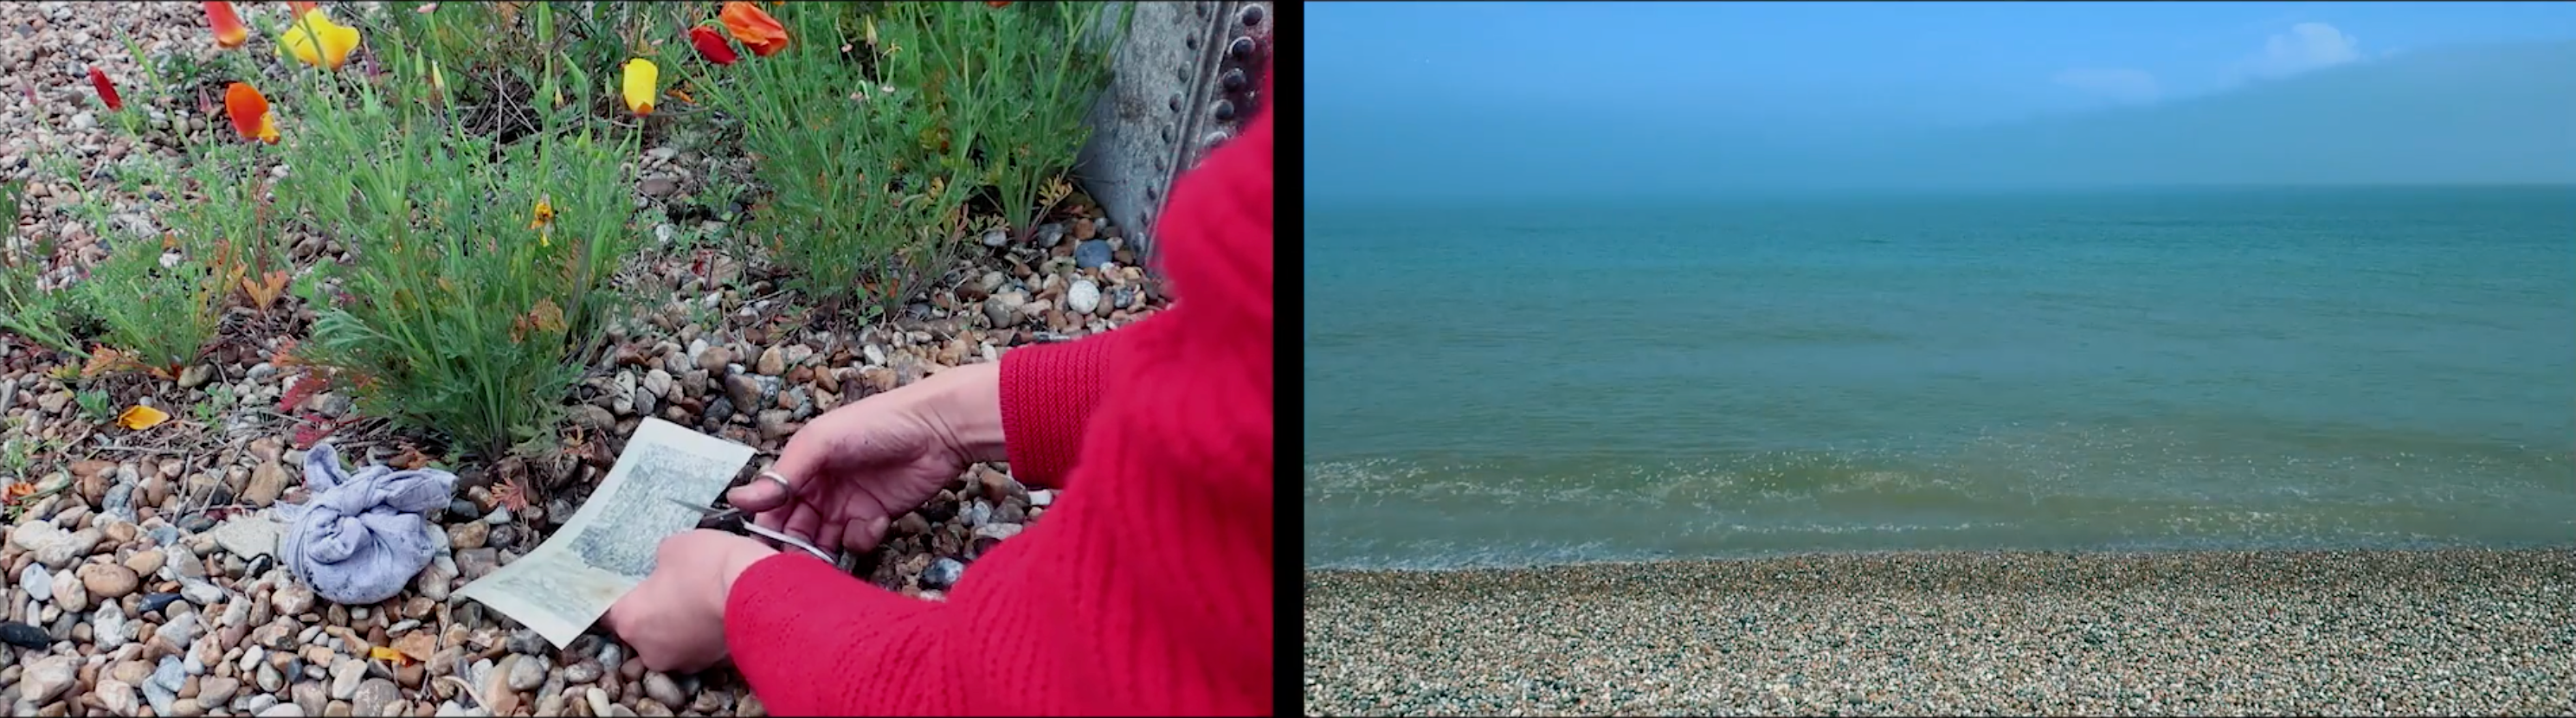 A split screen image. The right hand side is an image of a pebble shore line and the left is a person whose hands are cutting some form of material. There are yellow and red flowers visible and the ground is littered with small stones. The person is wearing a red jumper.